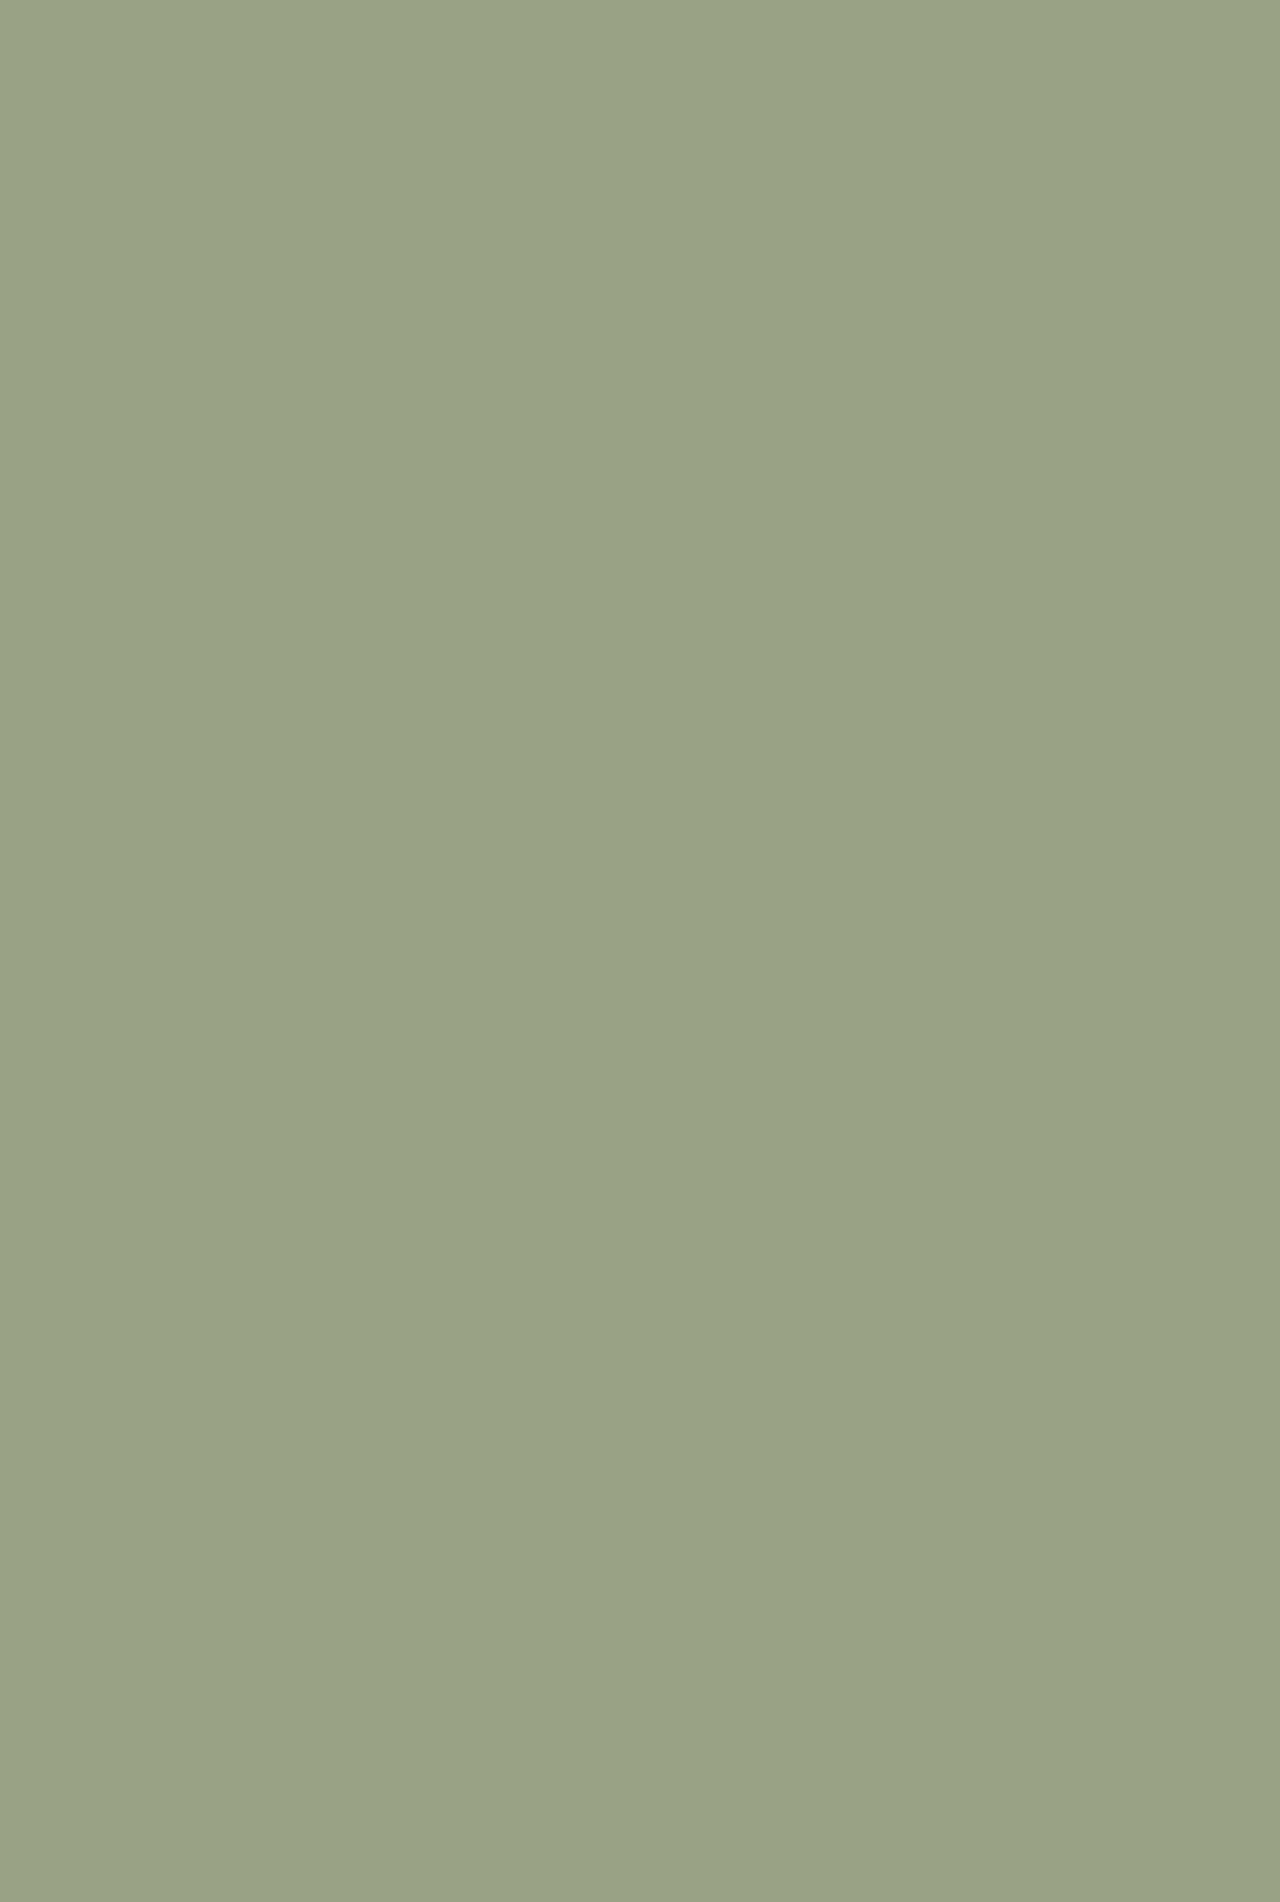 Olive Green Aesthetic Wallpapers - Wallpaper Cave